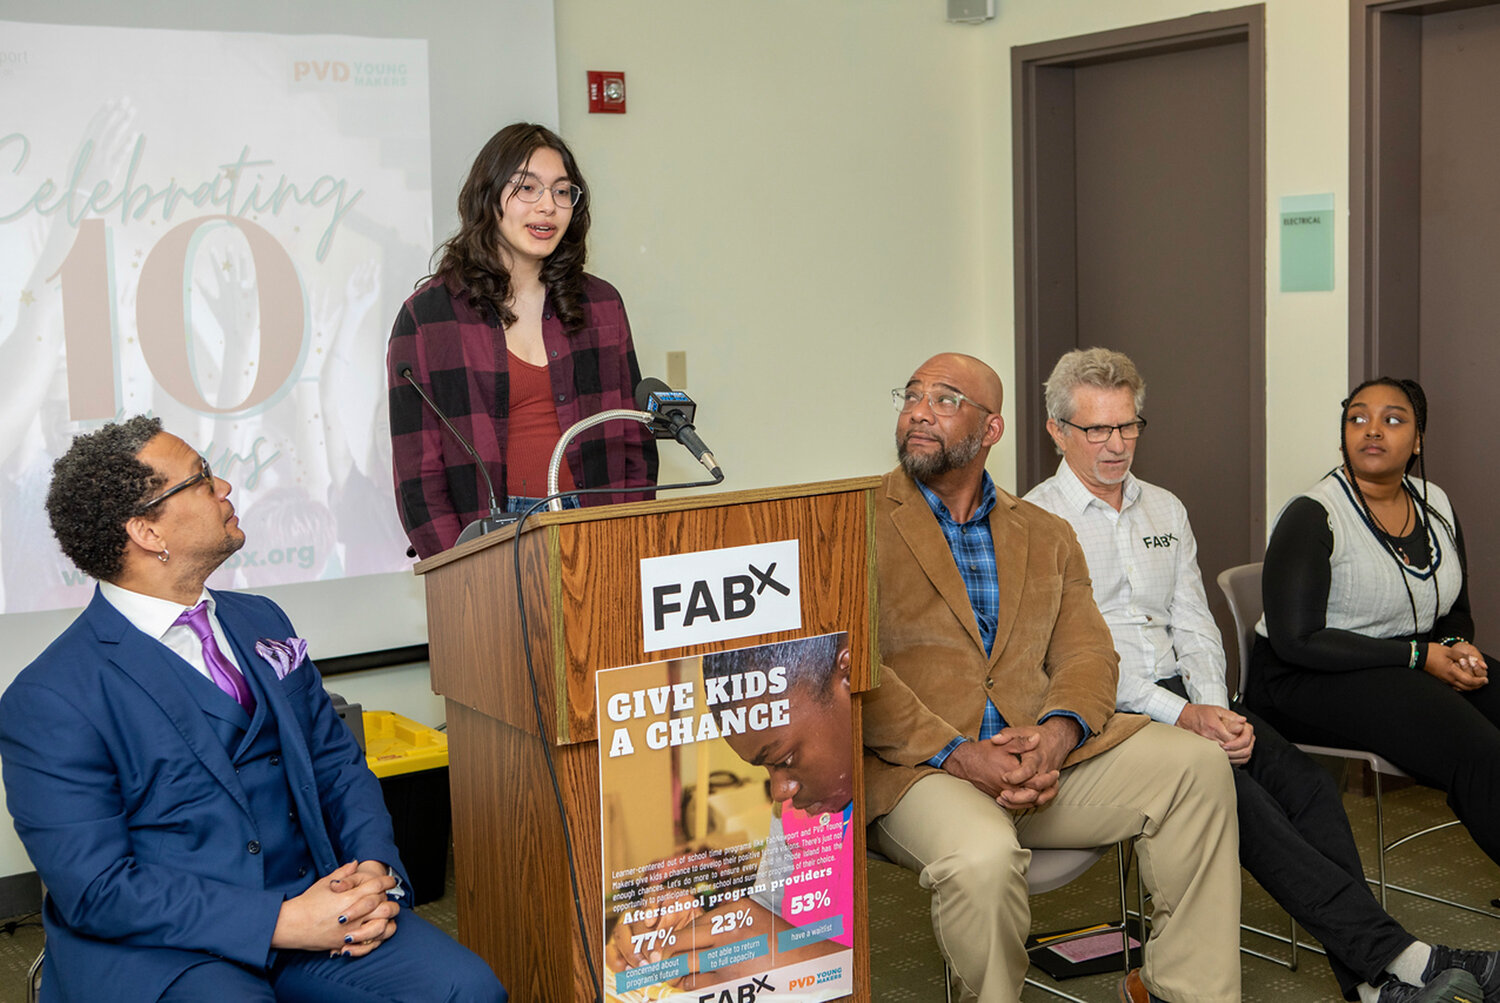 Katie Ochoa shared her FabNewport experiences at a recent press conference